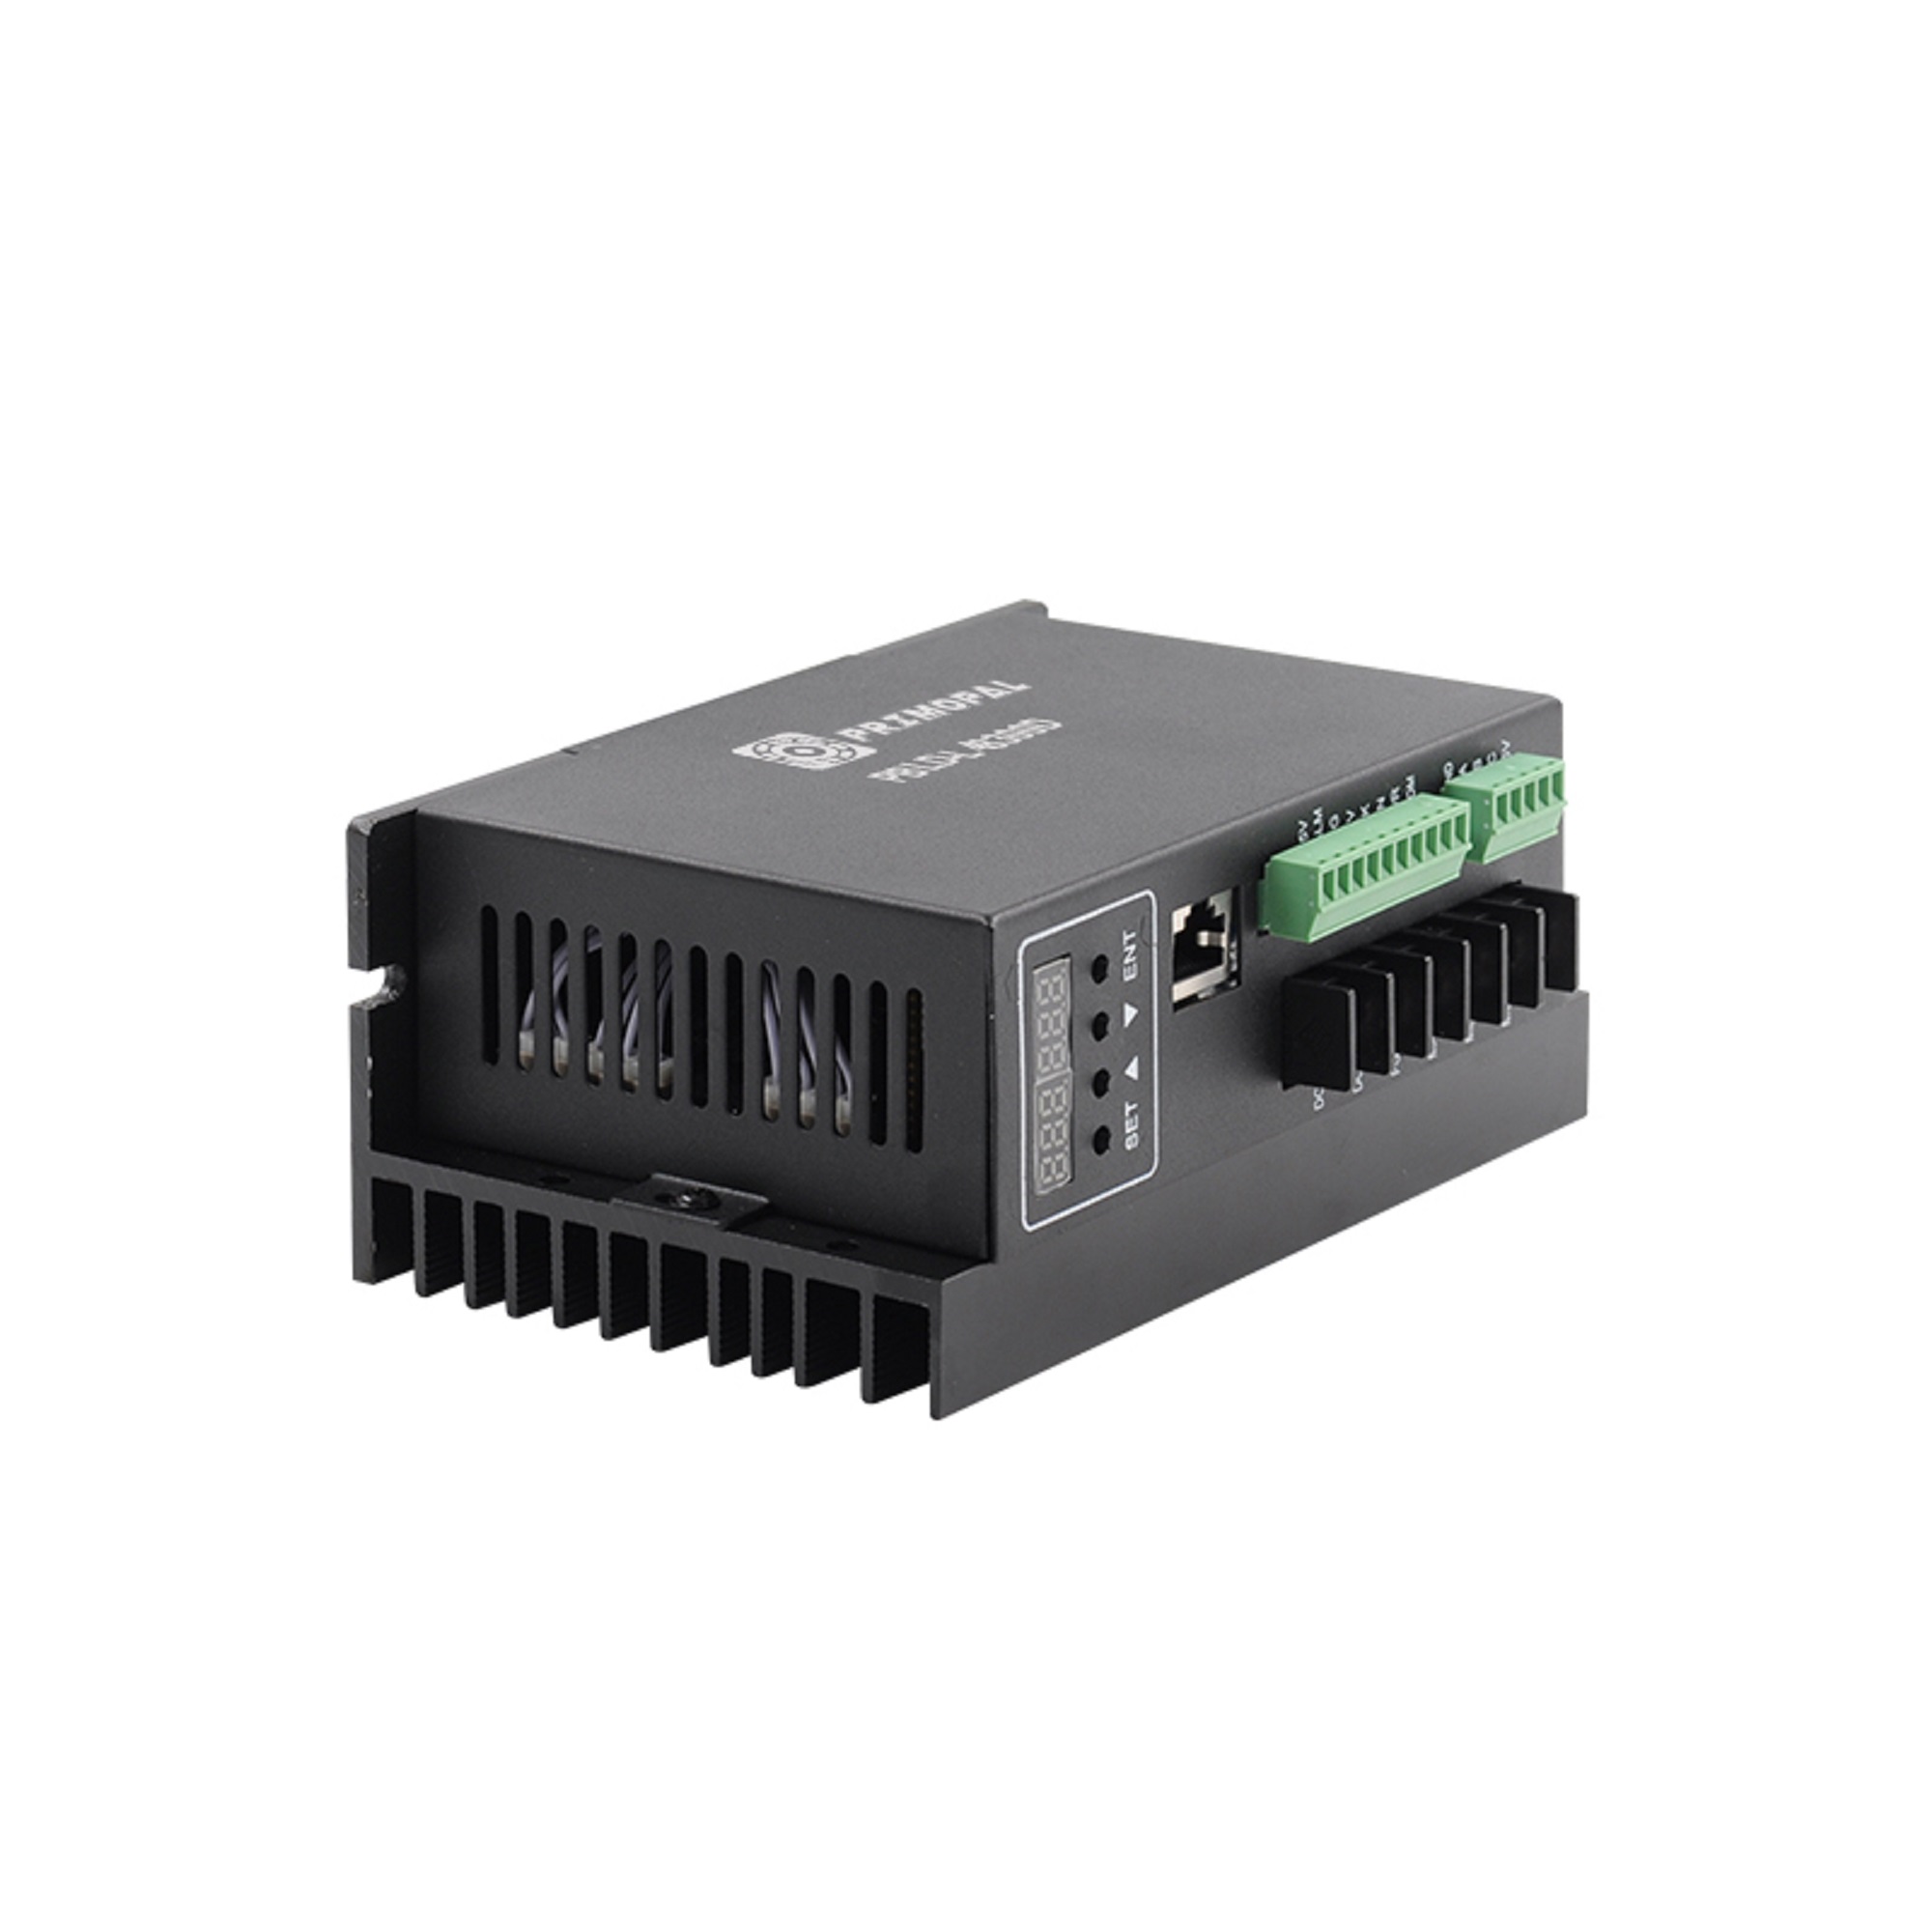 24-48VDC, Up to 750W